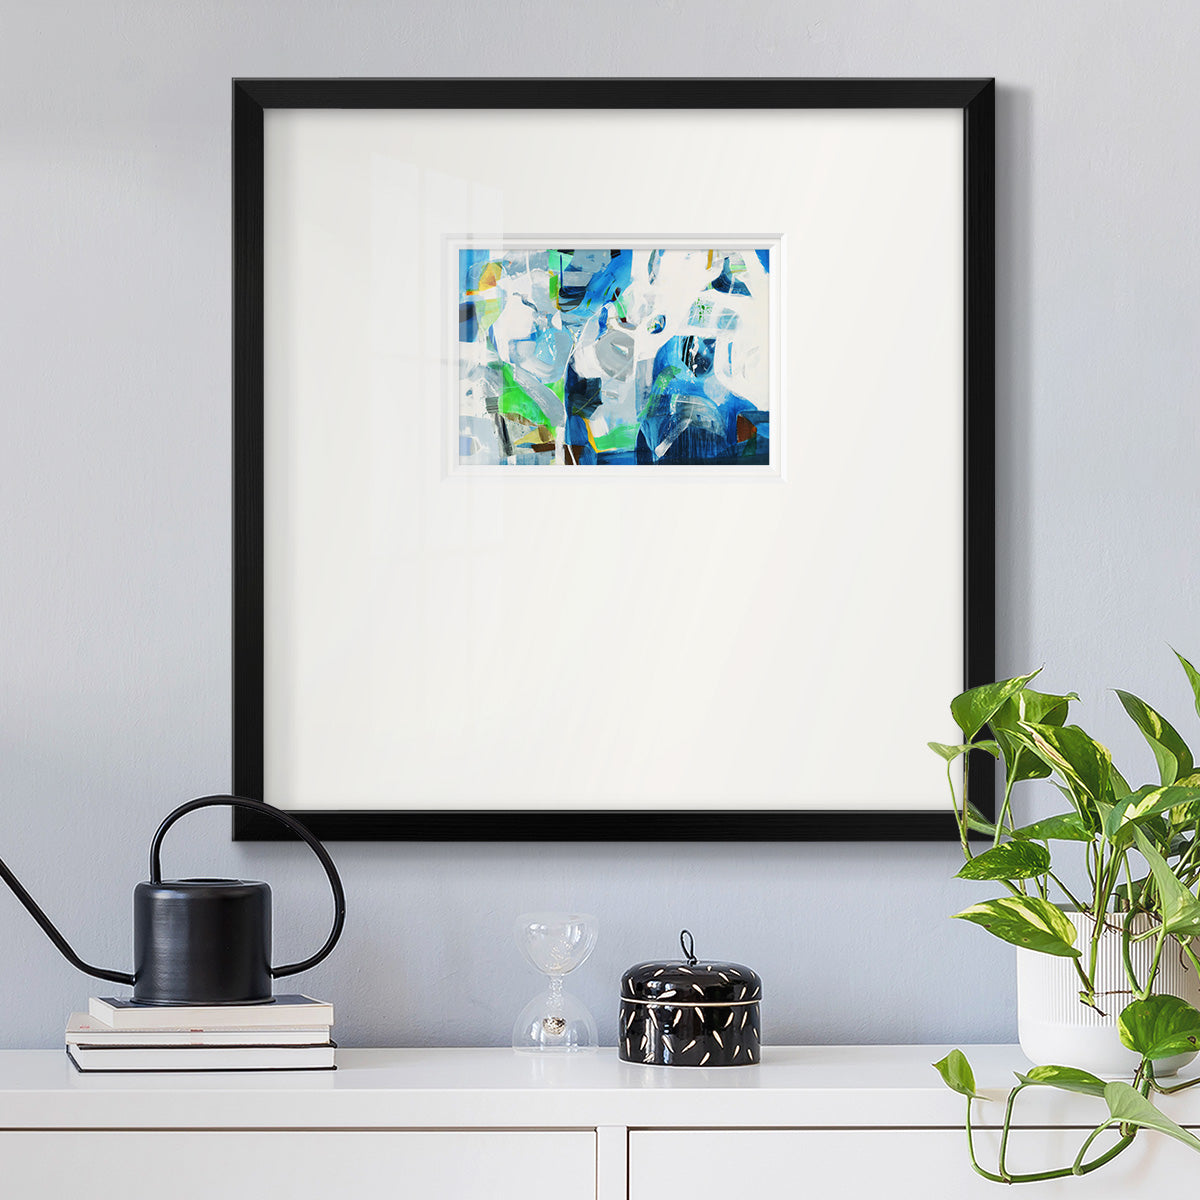 Down the Rapids- Premium Framed Print Double Matboard